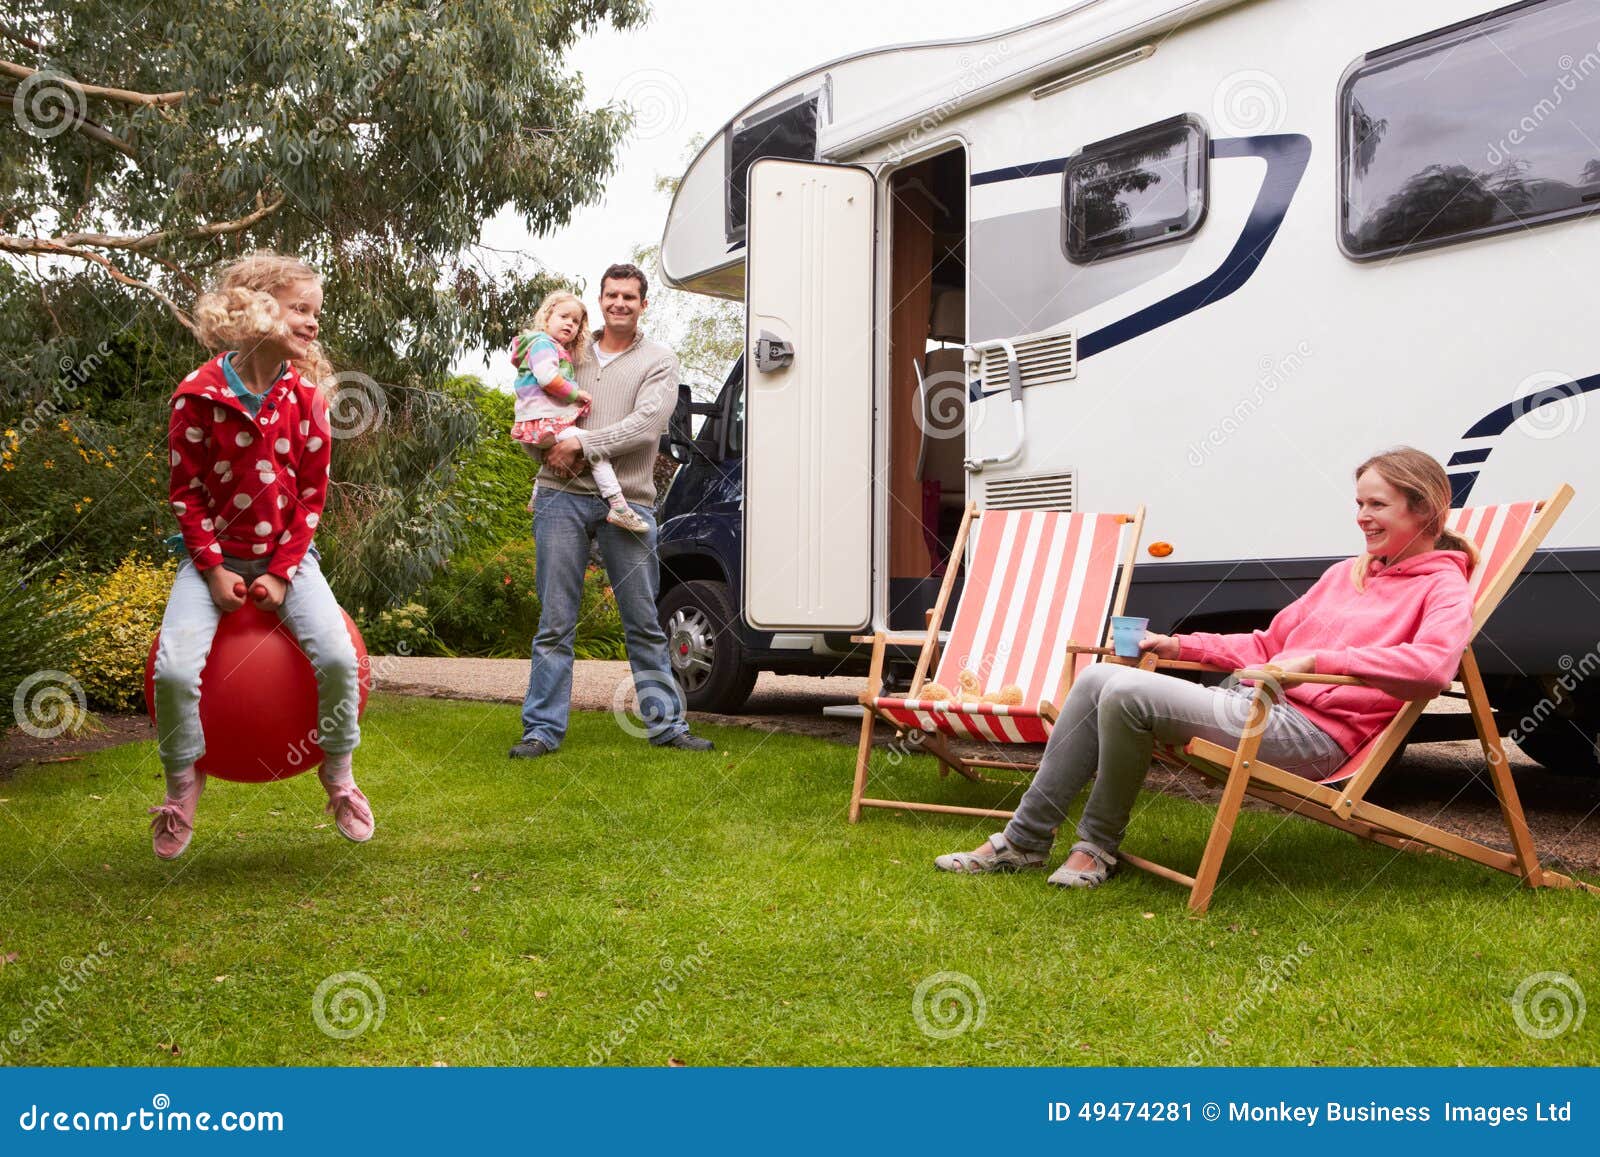 portrait of family enjoying camping holiday in camper van